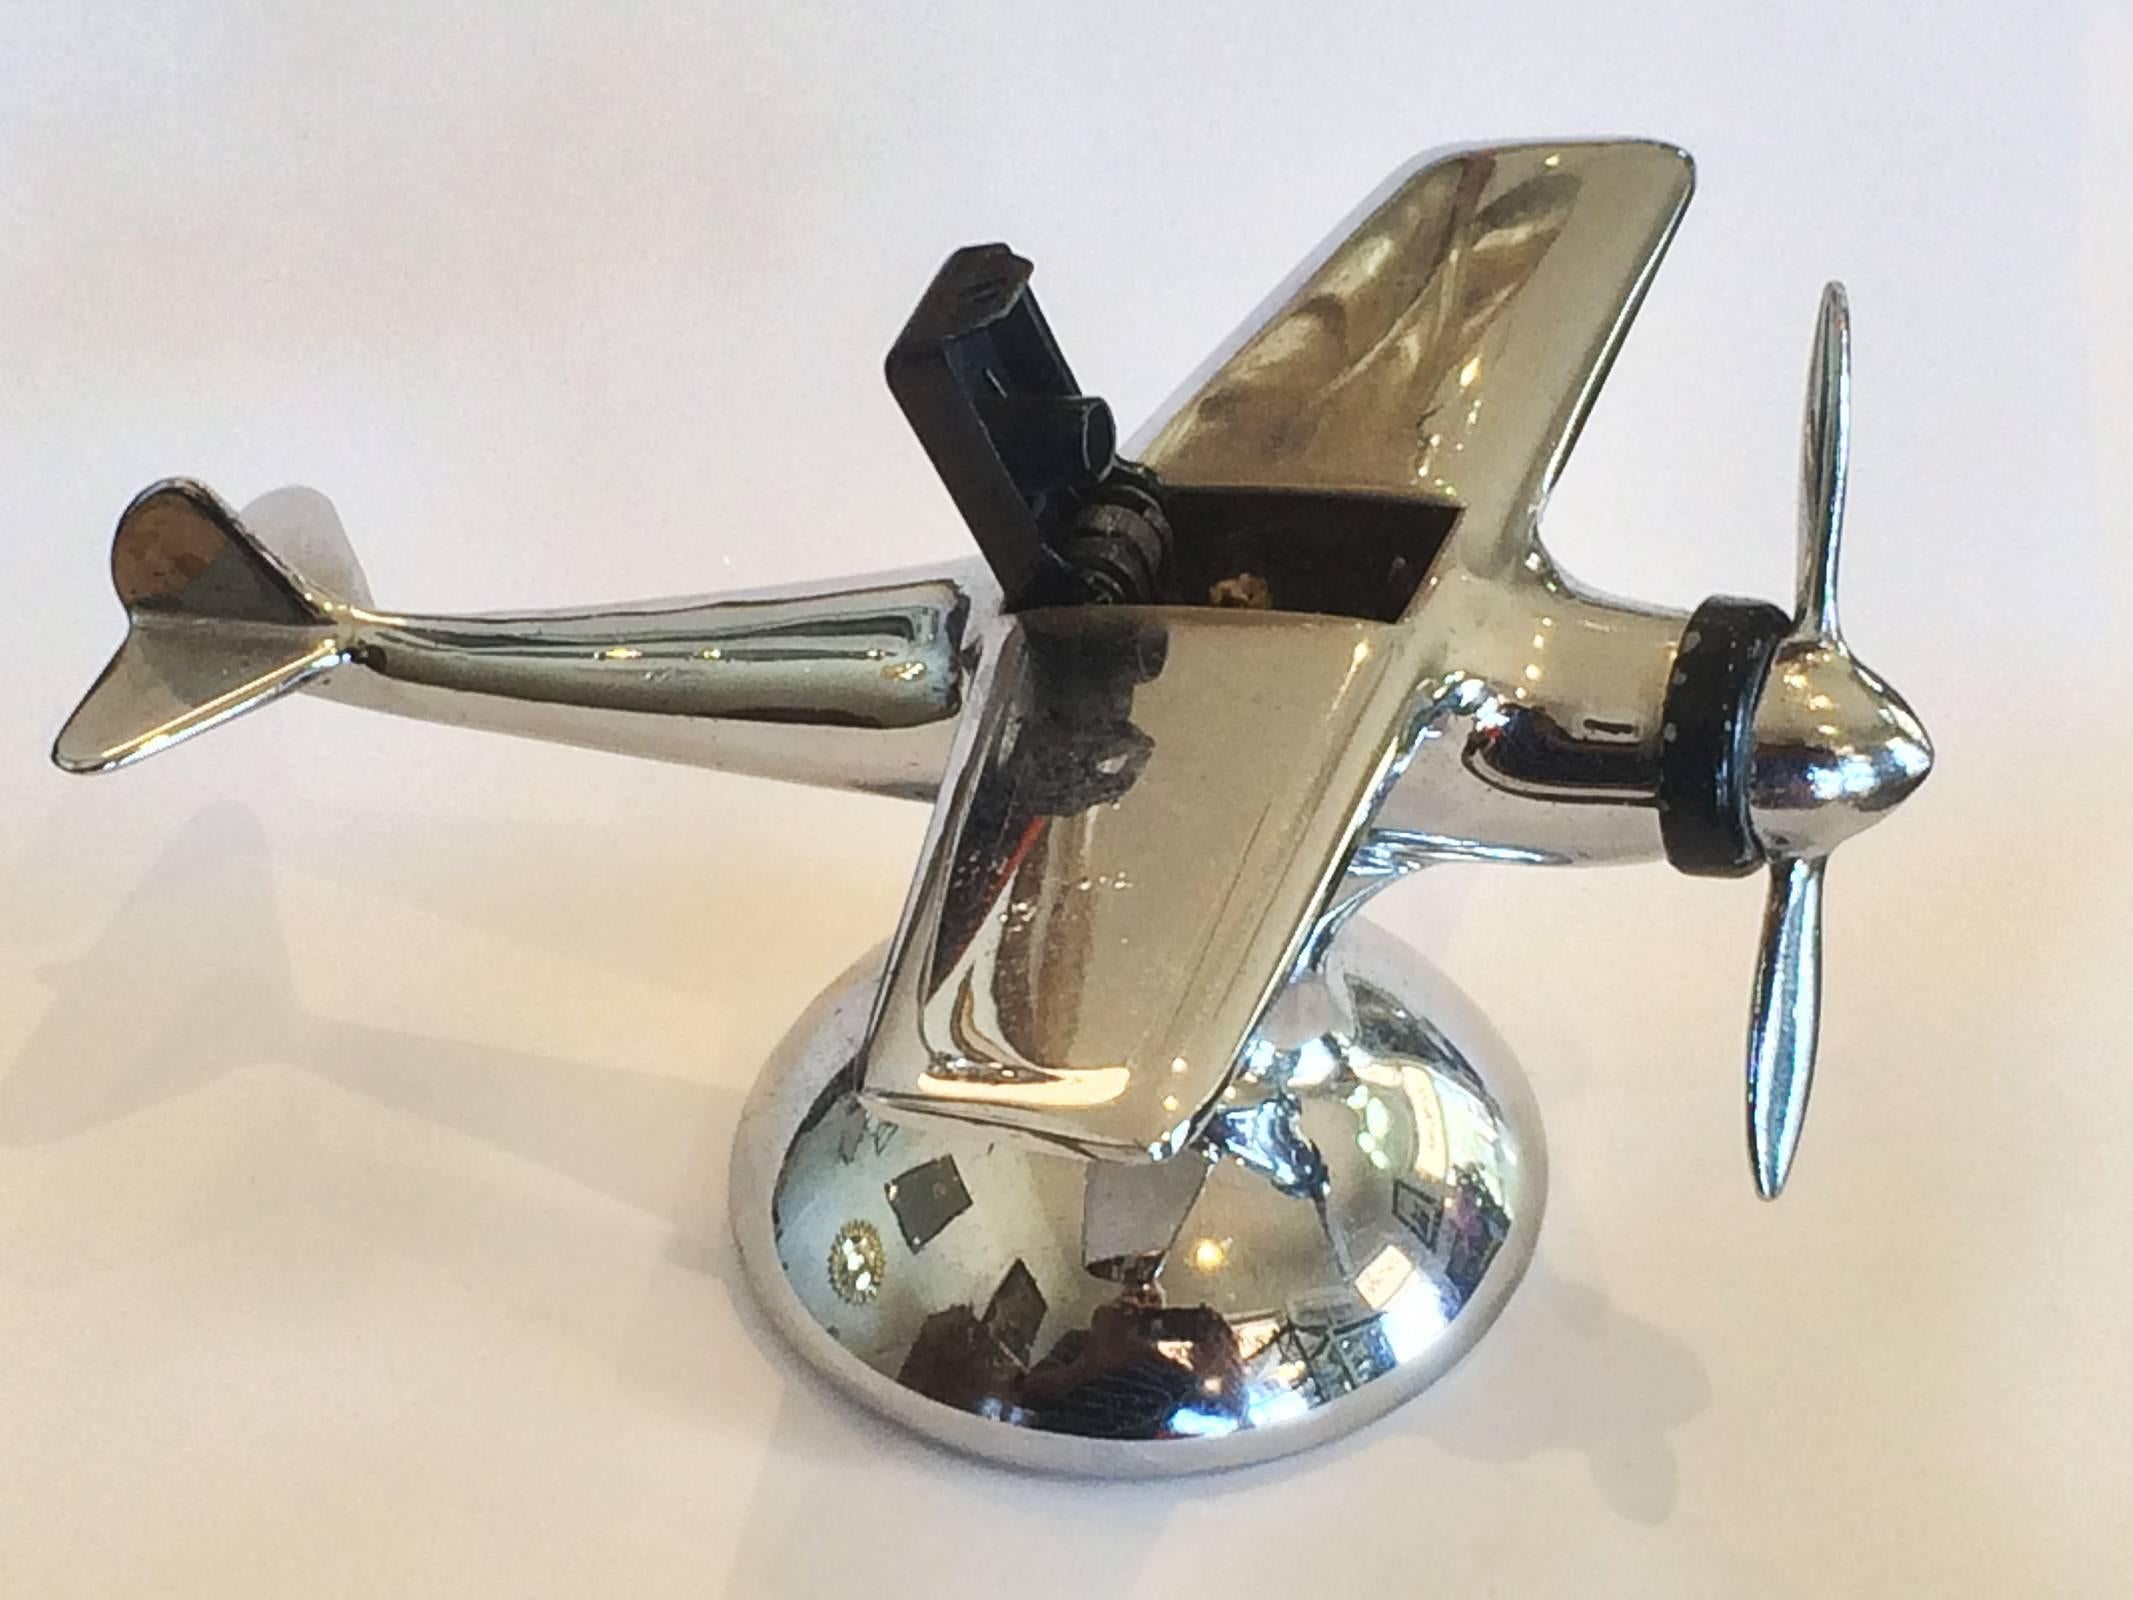 Art Deco cigarette lighter, 1930 Aeroplane by Hamilton's U.S.A.. Fantastic condition for age, with flint and fuel inlet at bottom of stand. Spin the propeller to “jettison” the cockpit cover, exposing the wick and flame from within the cockpit.